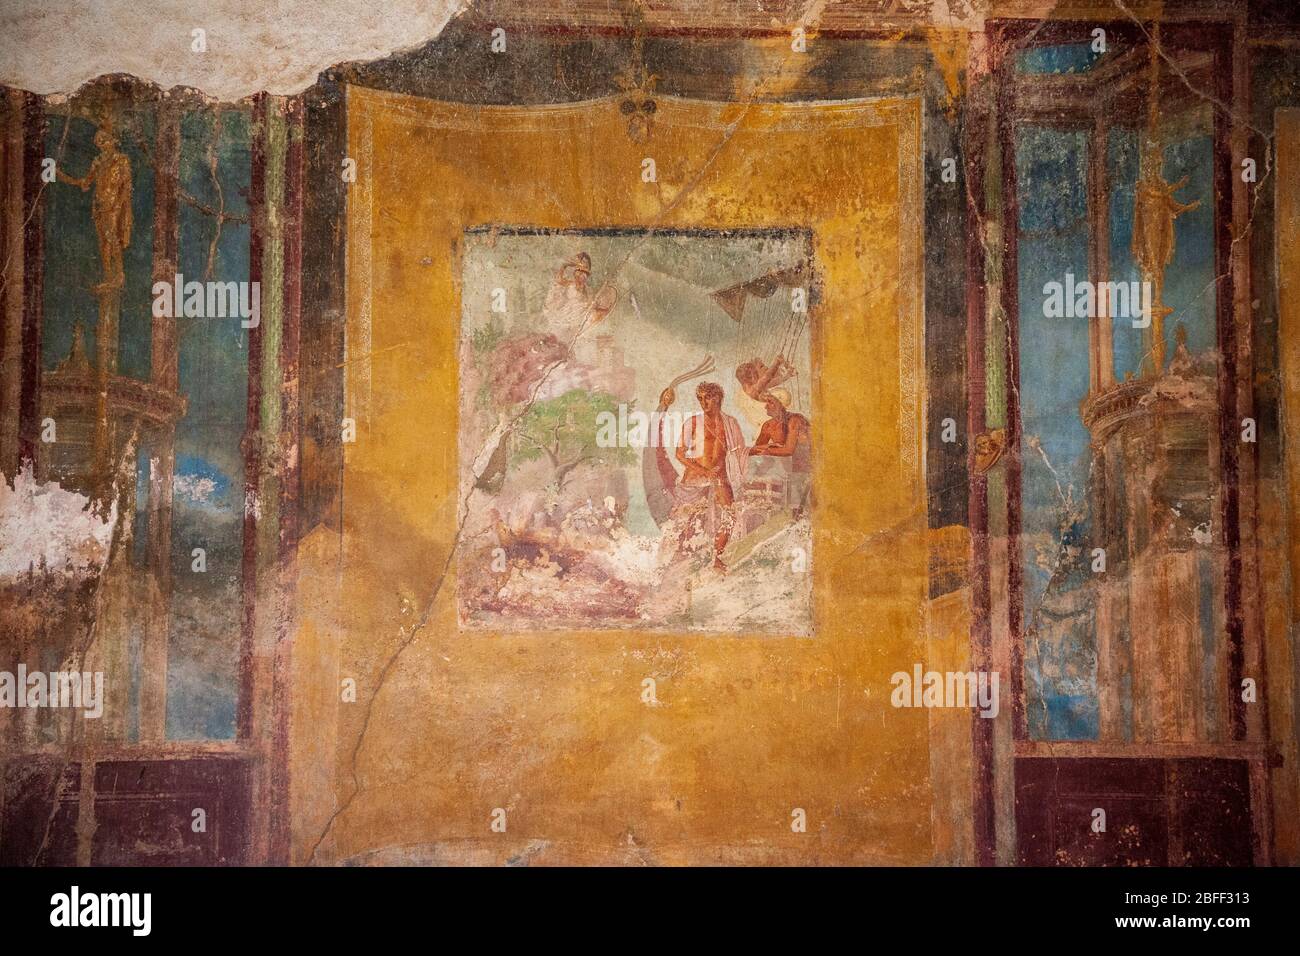 Detail of a wall fresco depicting Theseus and Ariadne in the Dining room of the House of the Tragic Poet, Pompeii, Italy Stock Photo